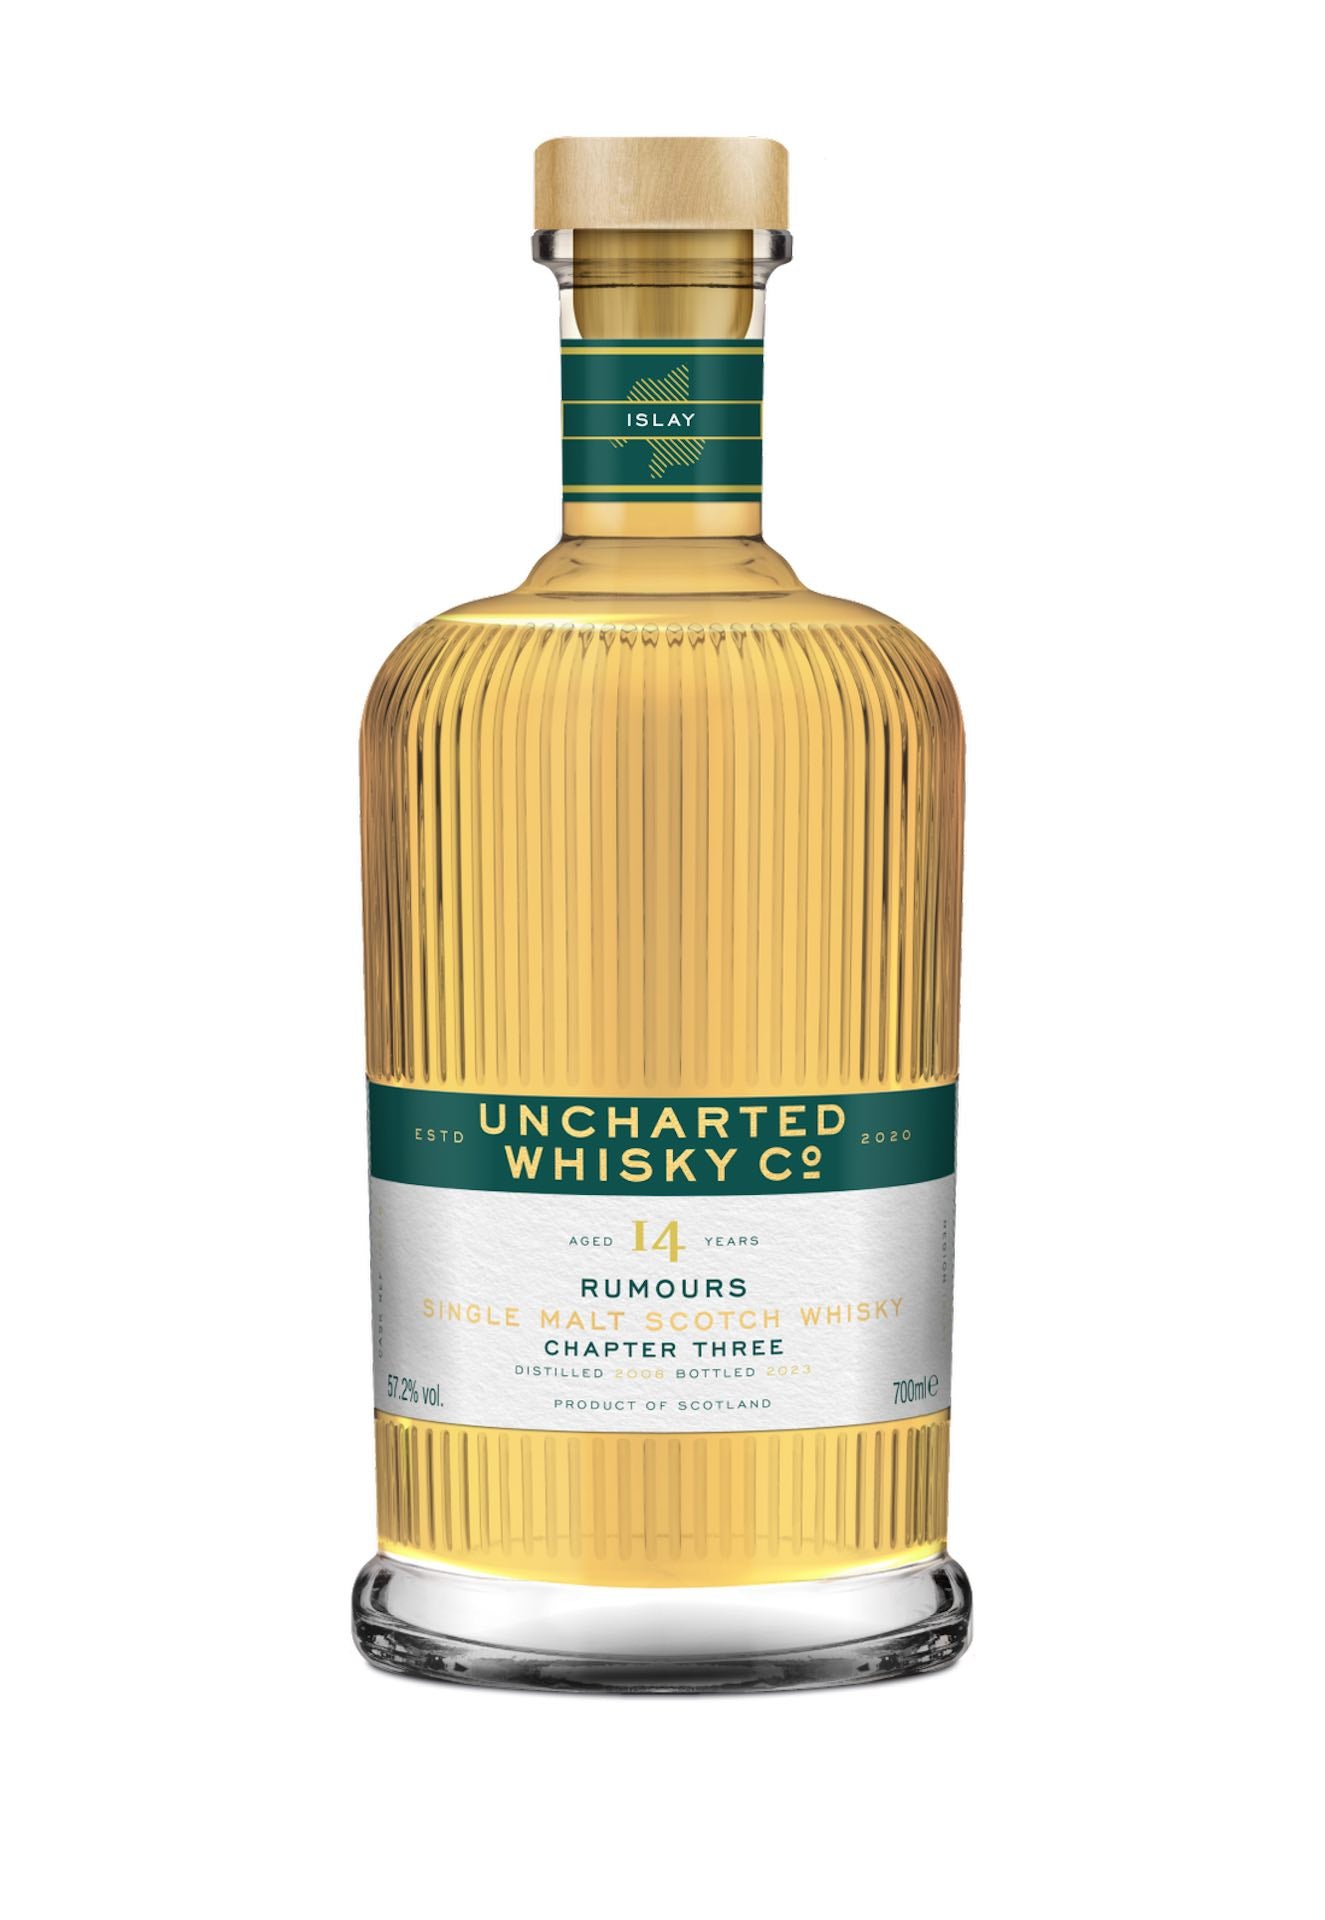 alt="Uncharted Whisky Co, Rumours Chapter 3, Secret Islay 14 Year Old"